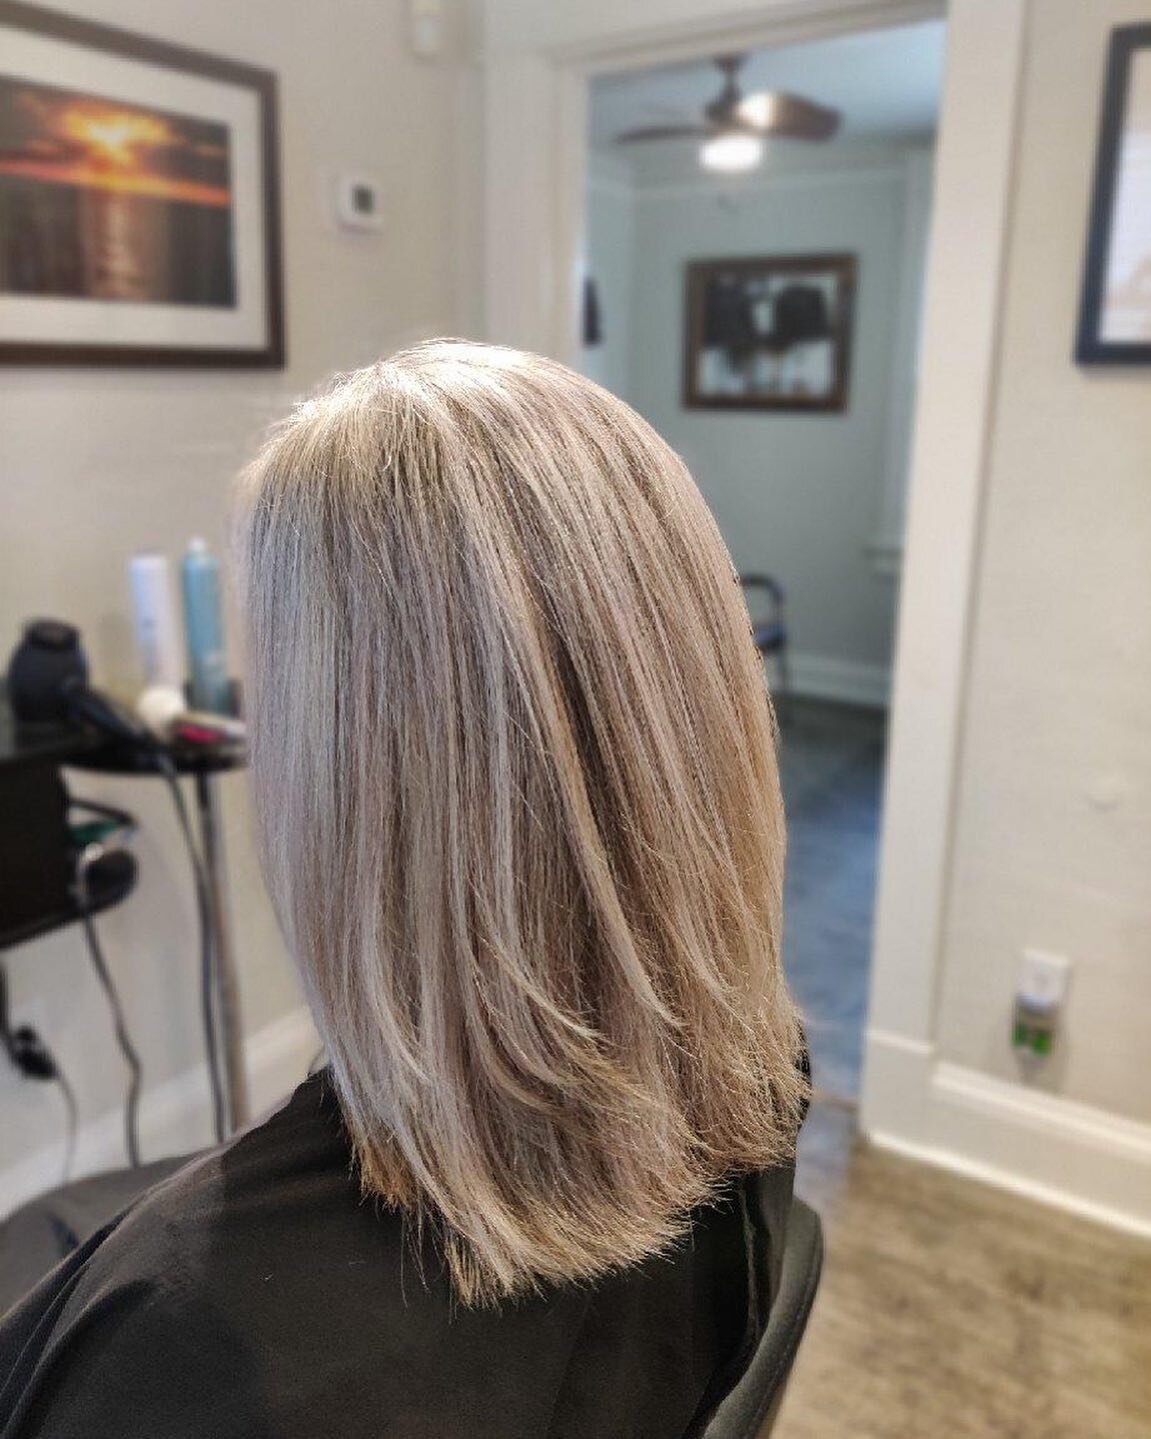 We did a beautiful transition from solid blonde color treated hair to naturally blended gray hair. #sevenhaircares #sevenhaircare #studioblond #757 #757hairstylist #northcolley #hamptonroads #hamptonroadsva #loreal #lorealpro #pureology #salonproorbi